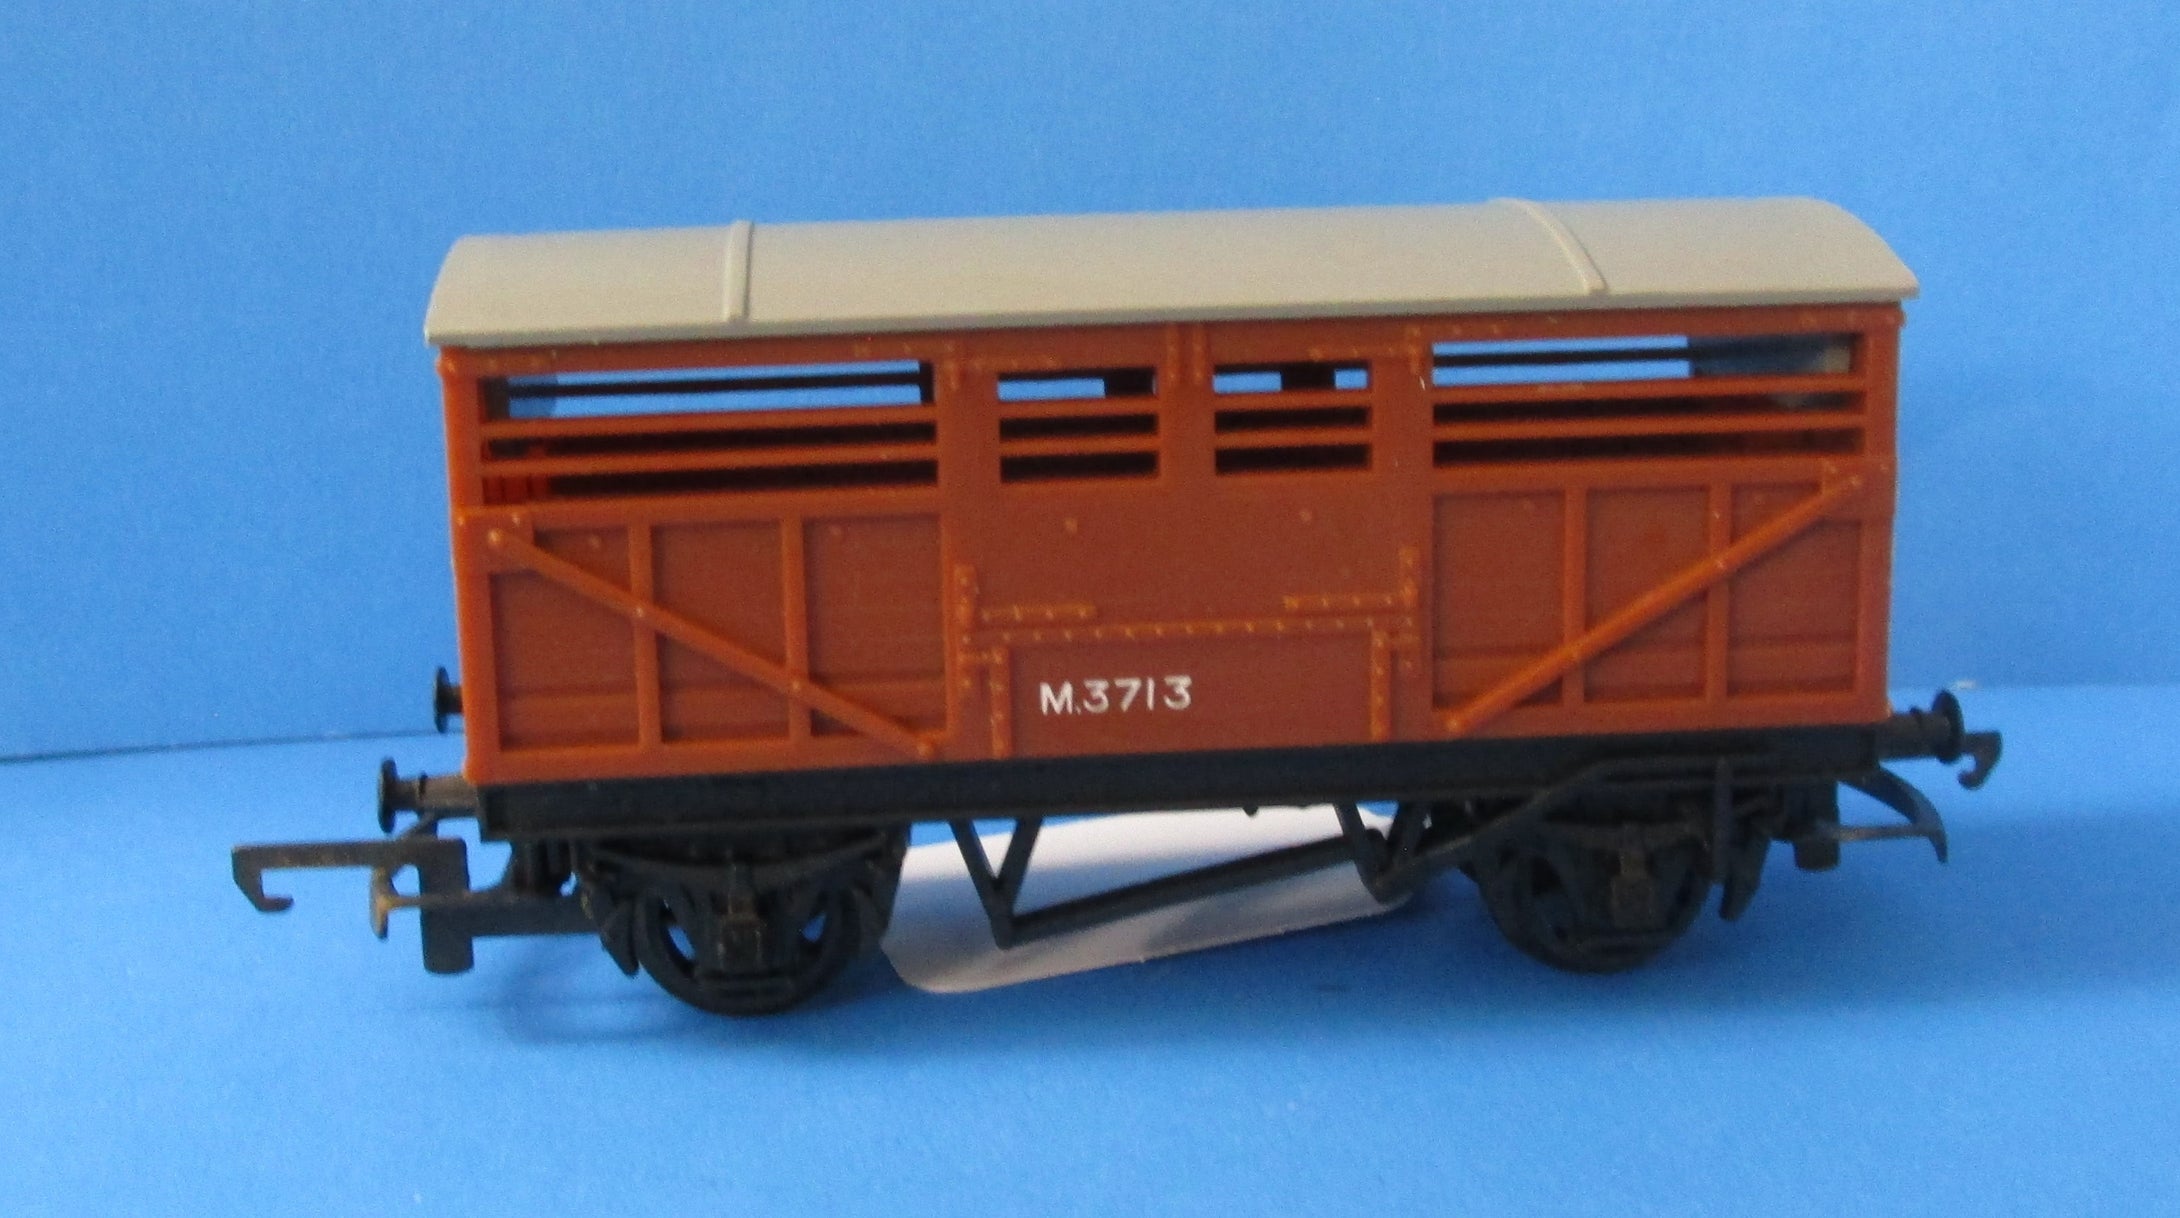 R122-P05 HORNBYBR Cattle Wagon M3713 - UNBOXED